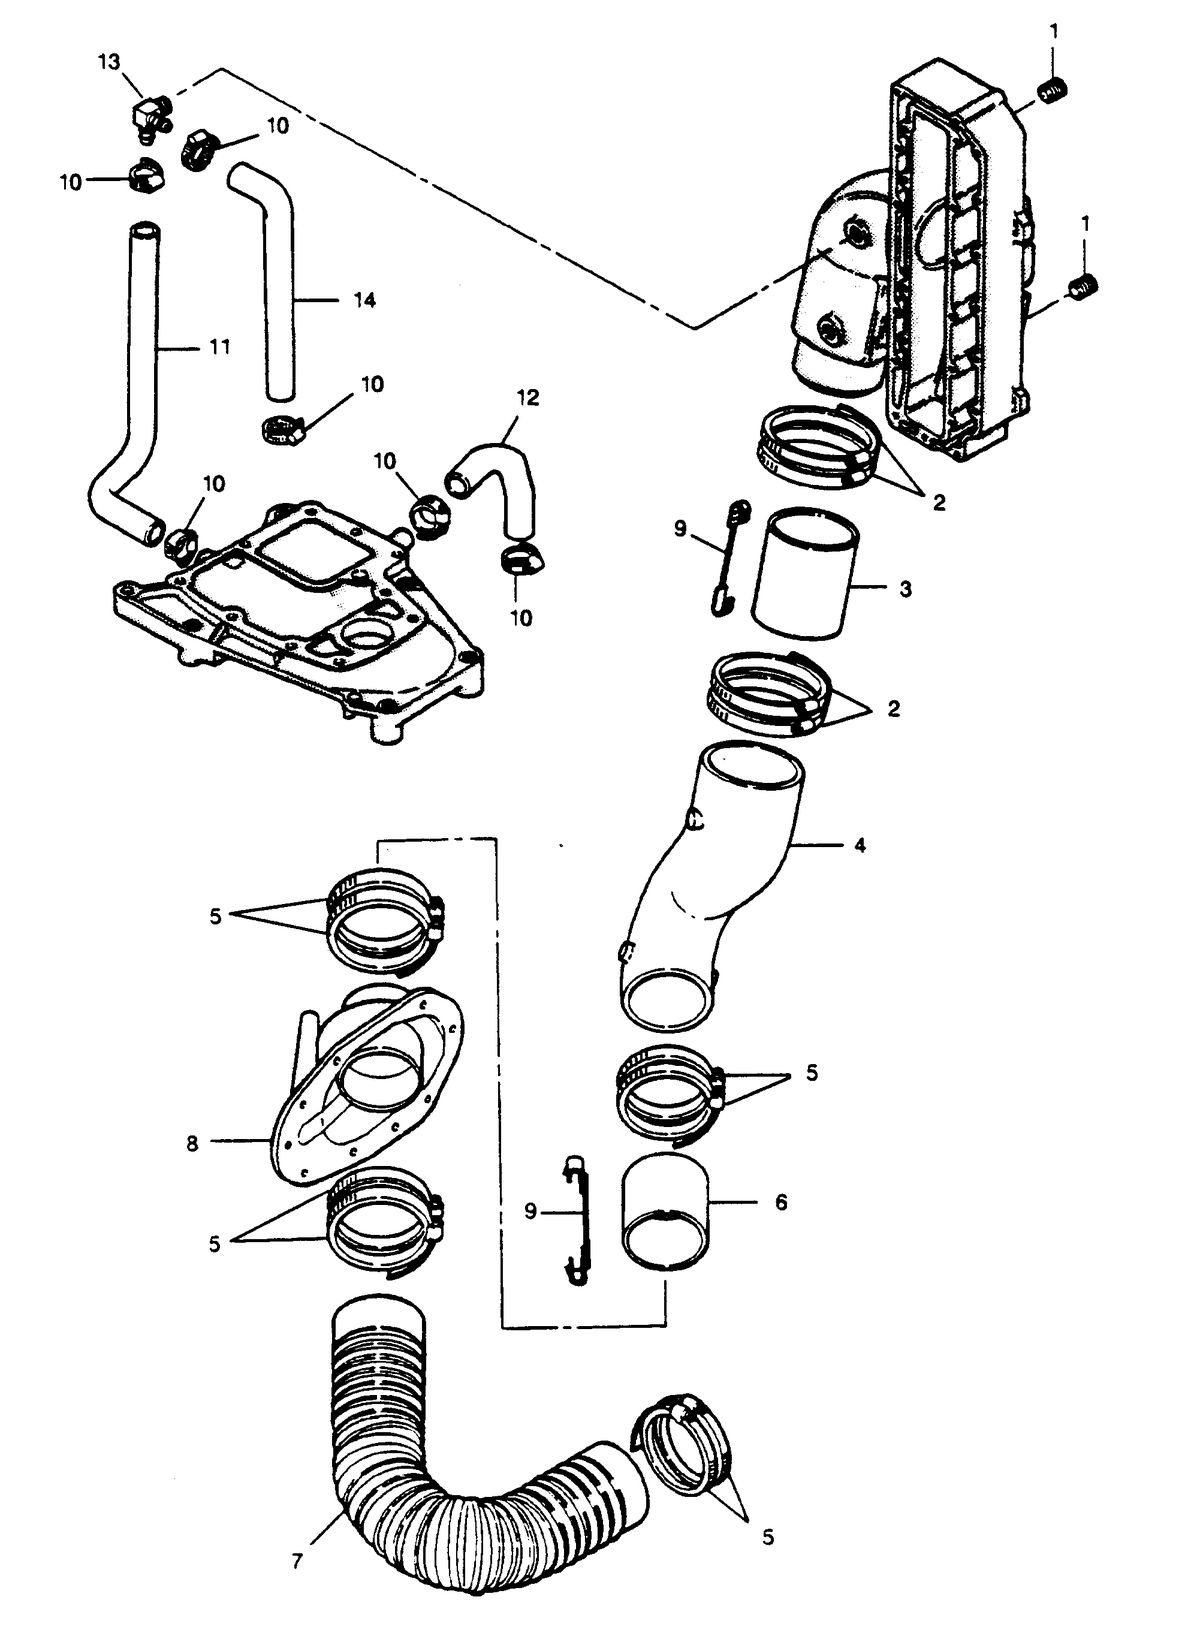 FORCE FORCE 1989 85 H.P. "B" MODEL L-DRIVE EXHAUST SYSTEM